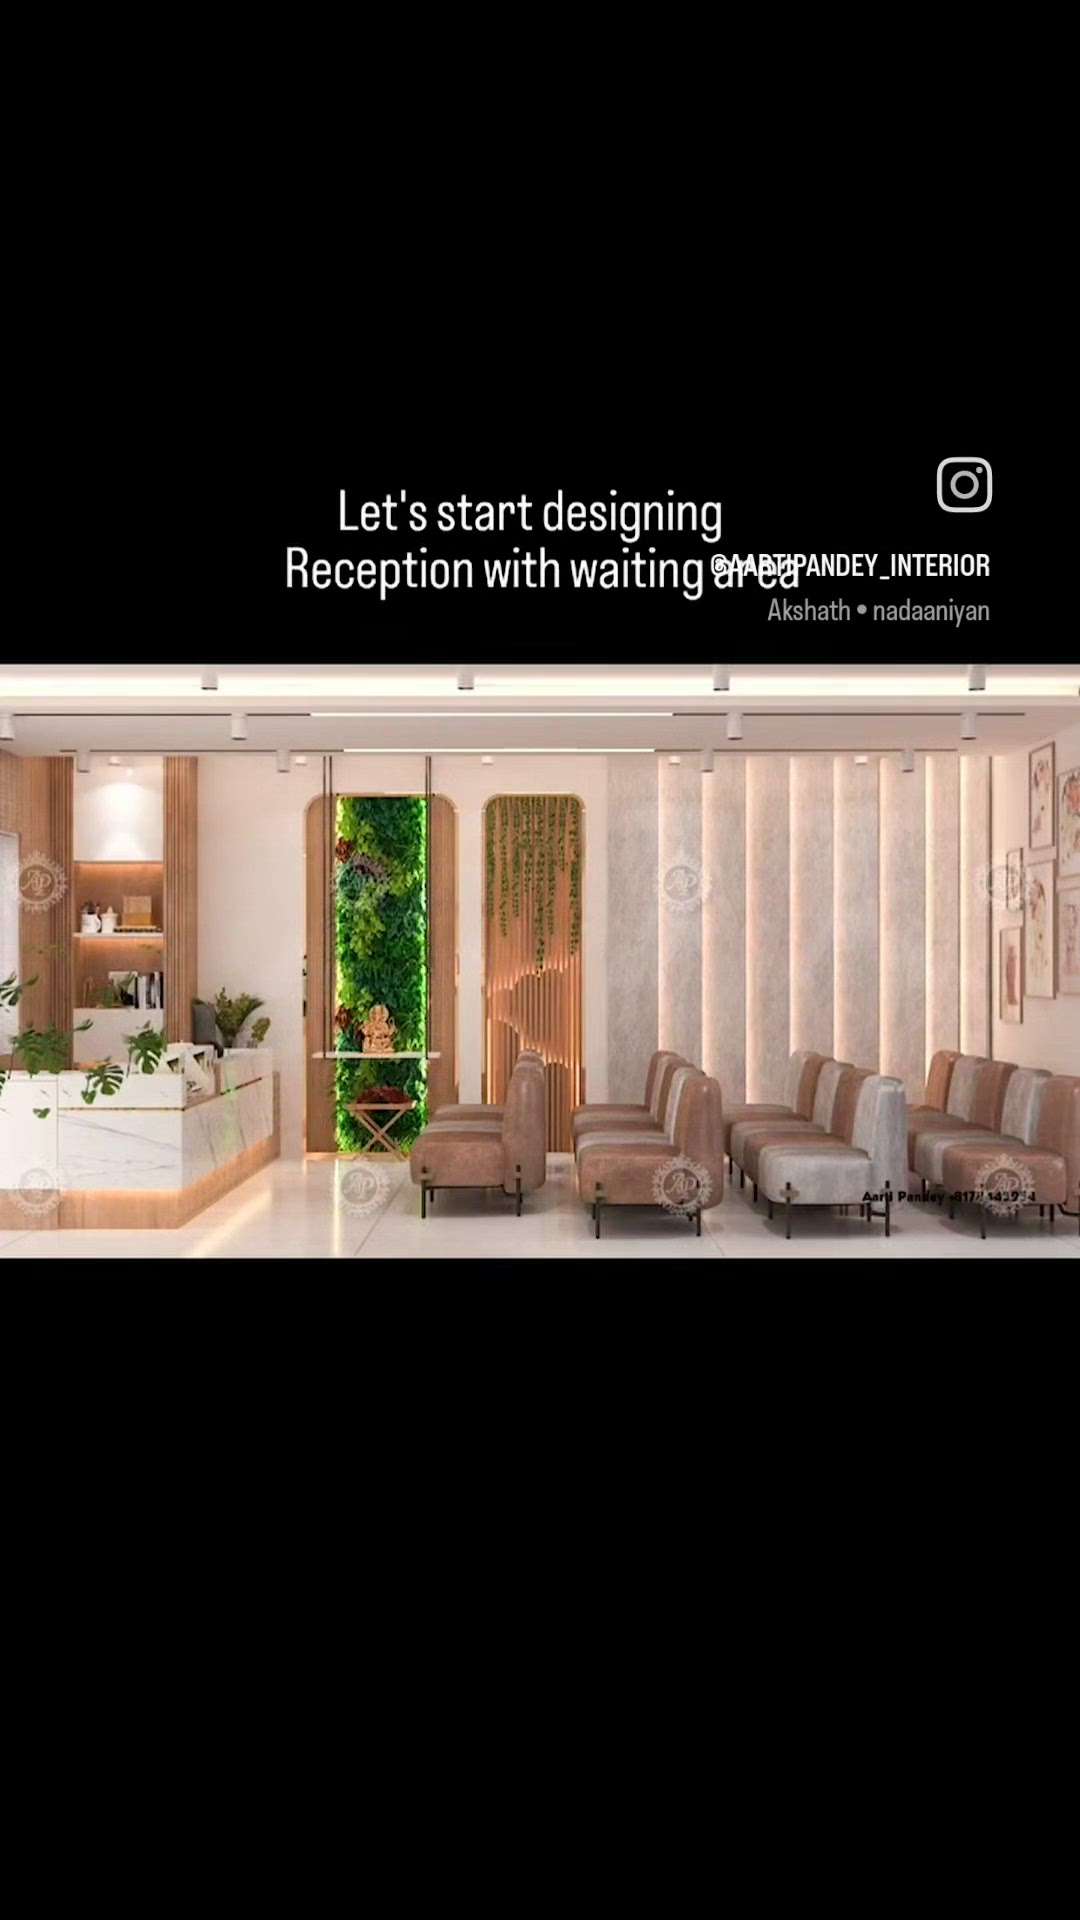 Let's start new designing of reception nd waiting area
AP INTERIORS 
Aarti Pandey 
#reception #receptiondesigning #interiorinspiration😍❤️ #designer #designerlife #walltreatments #skincare #hairtransformation #newwork #newwaitingarea